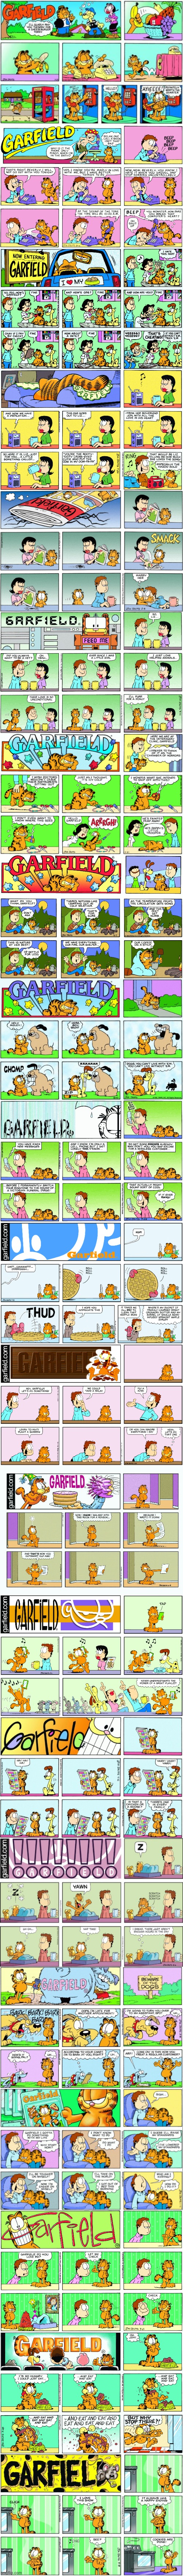 The Biggest Collection Of Garfield Sunday Strips | image tagged in garfield,funny,comic,comics/cartoons,jon,odie | made w/ Imgflip meme maker